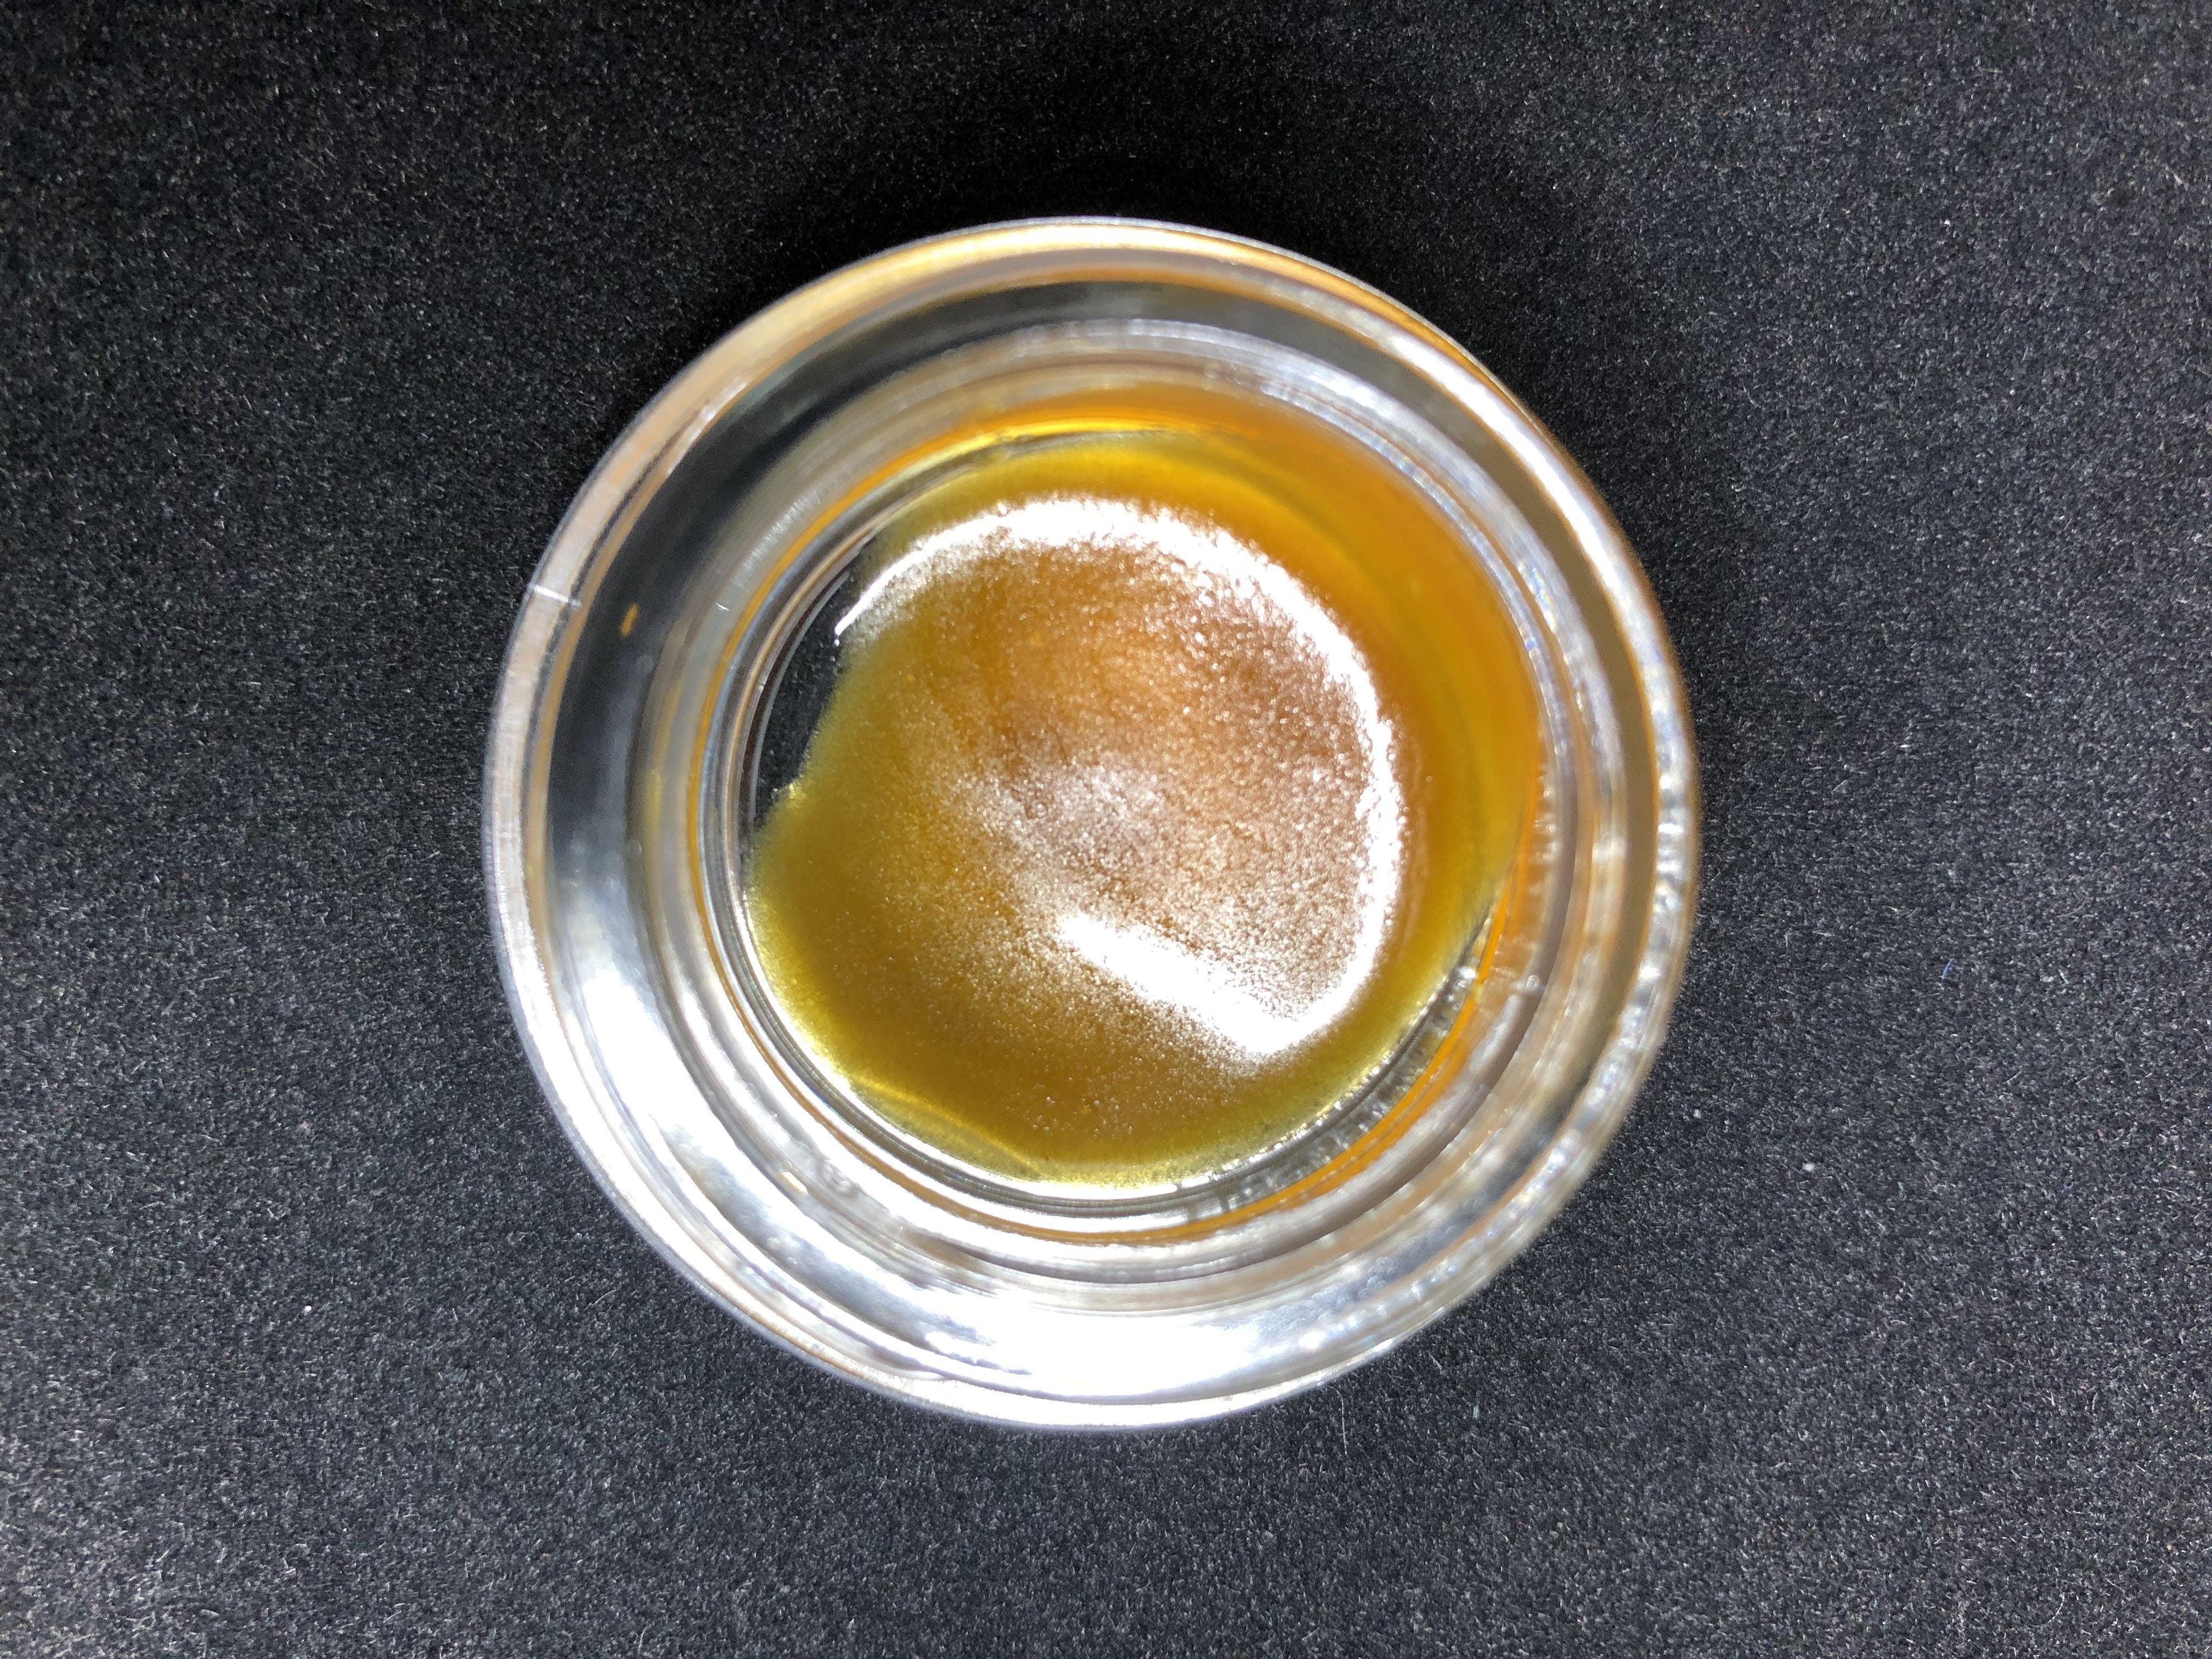 concentrate-cannalicious-dream-queen-sauce-1g